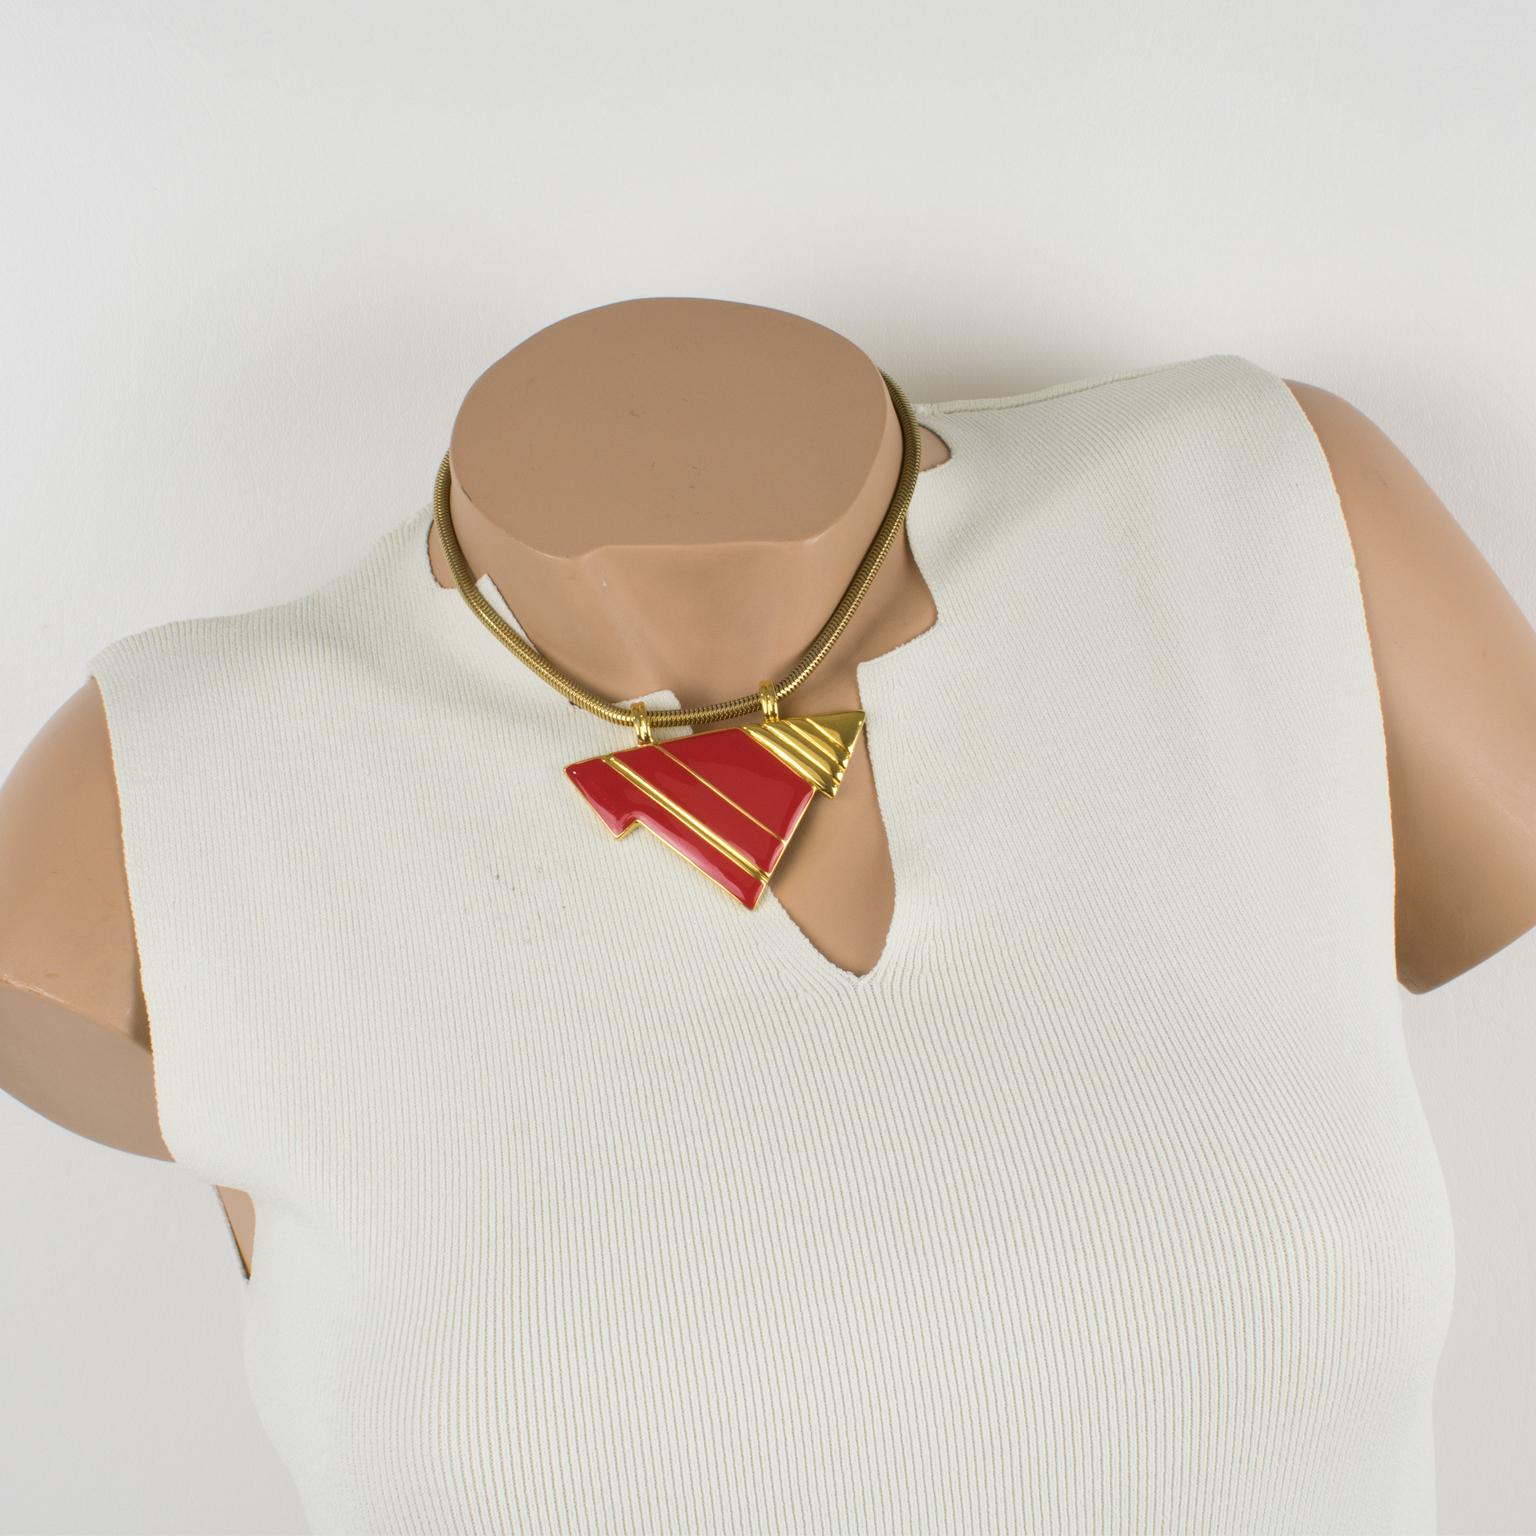 This lovely Lanvin Paris modernist pendant choker necklace features a serpentine gilded metal chain ornate with a geometric pendant in shiny gilt metal and red enamel. The choker has a spring ring-closing clasp and is signed with a small gilded tag